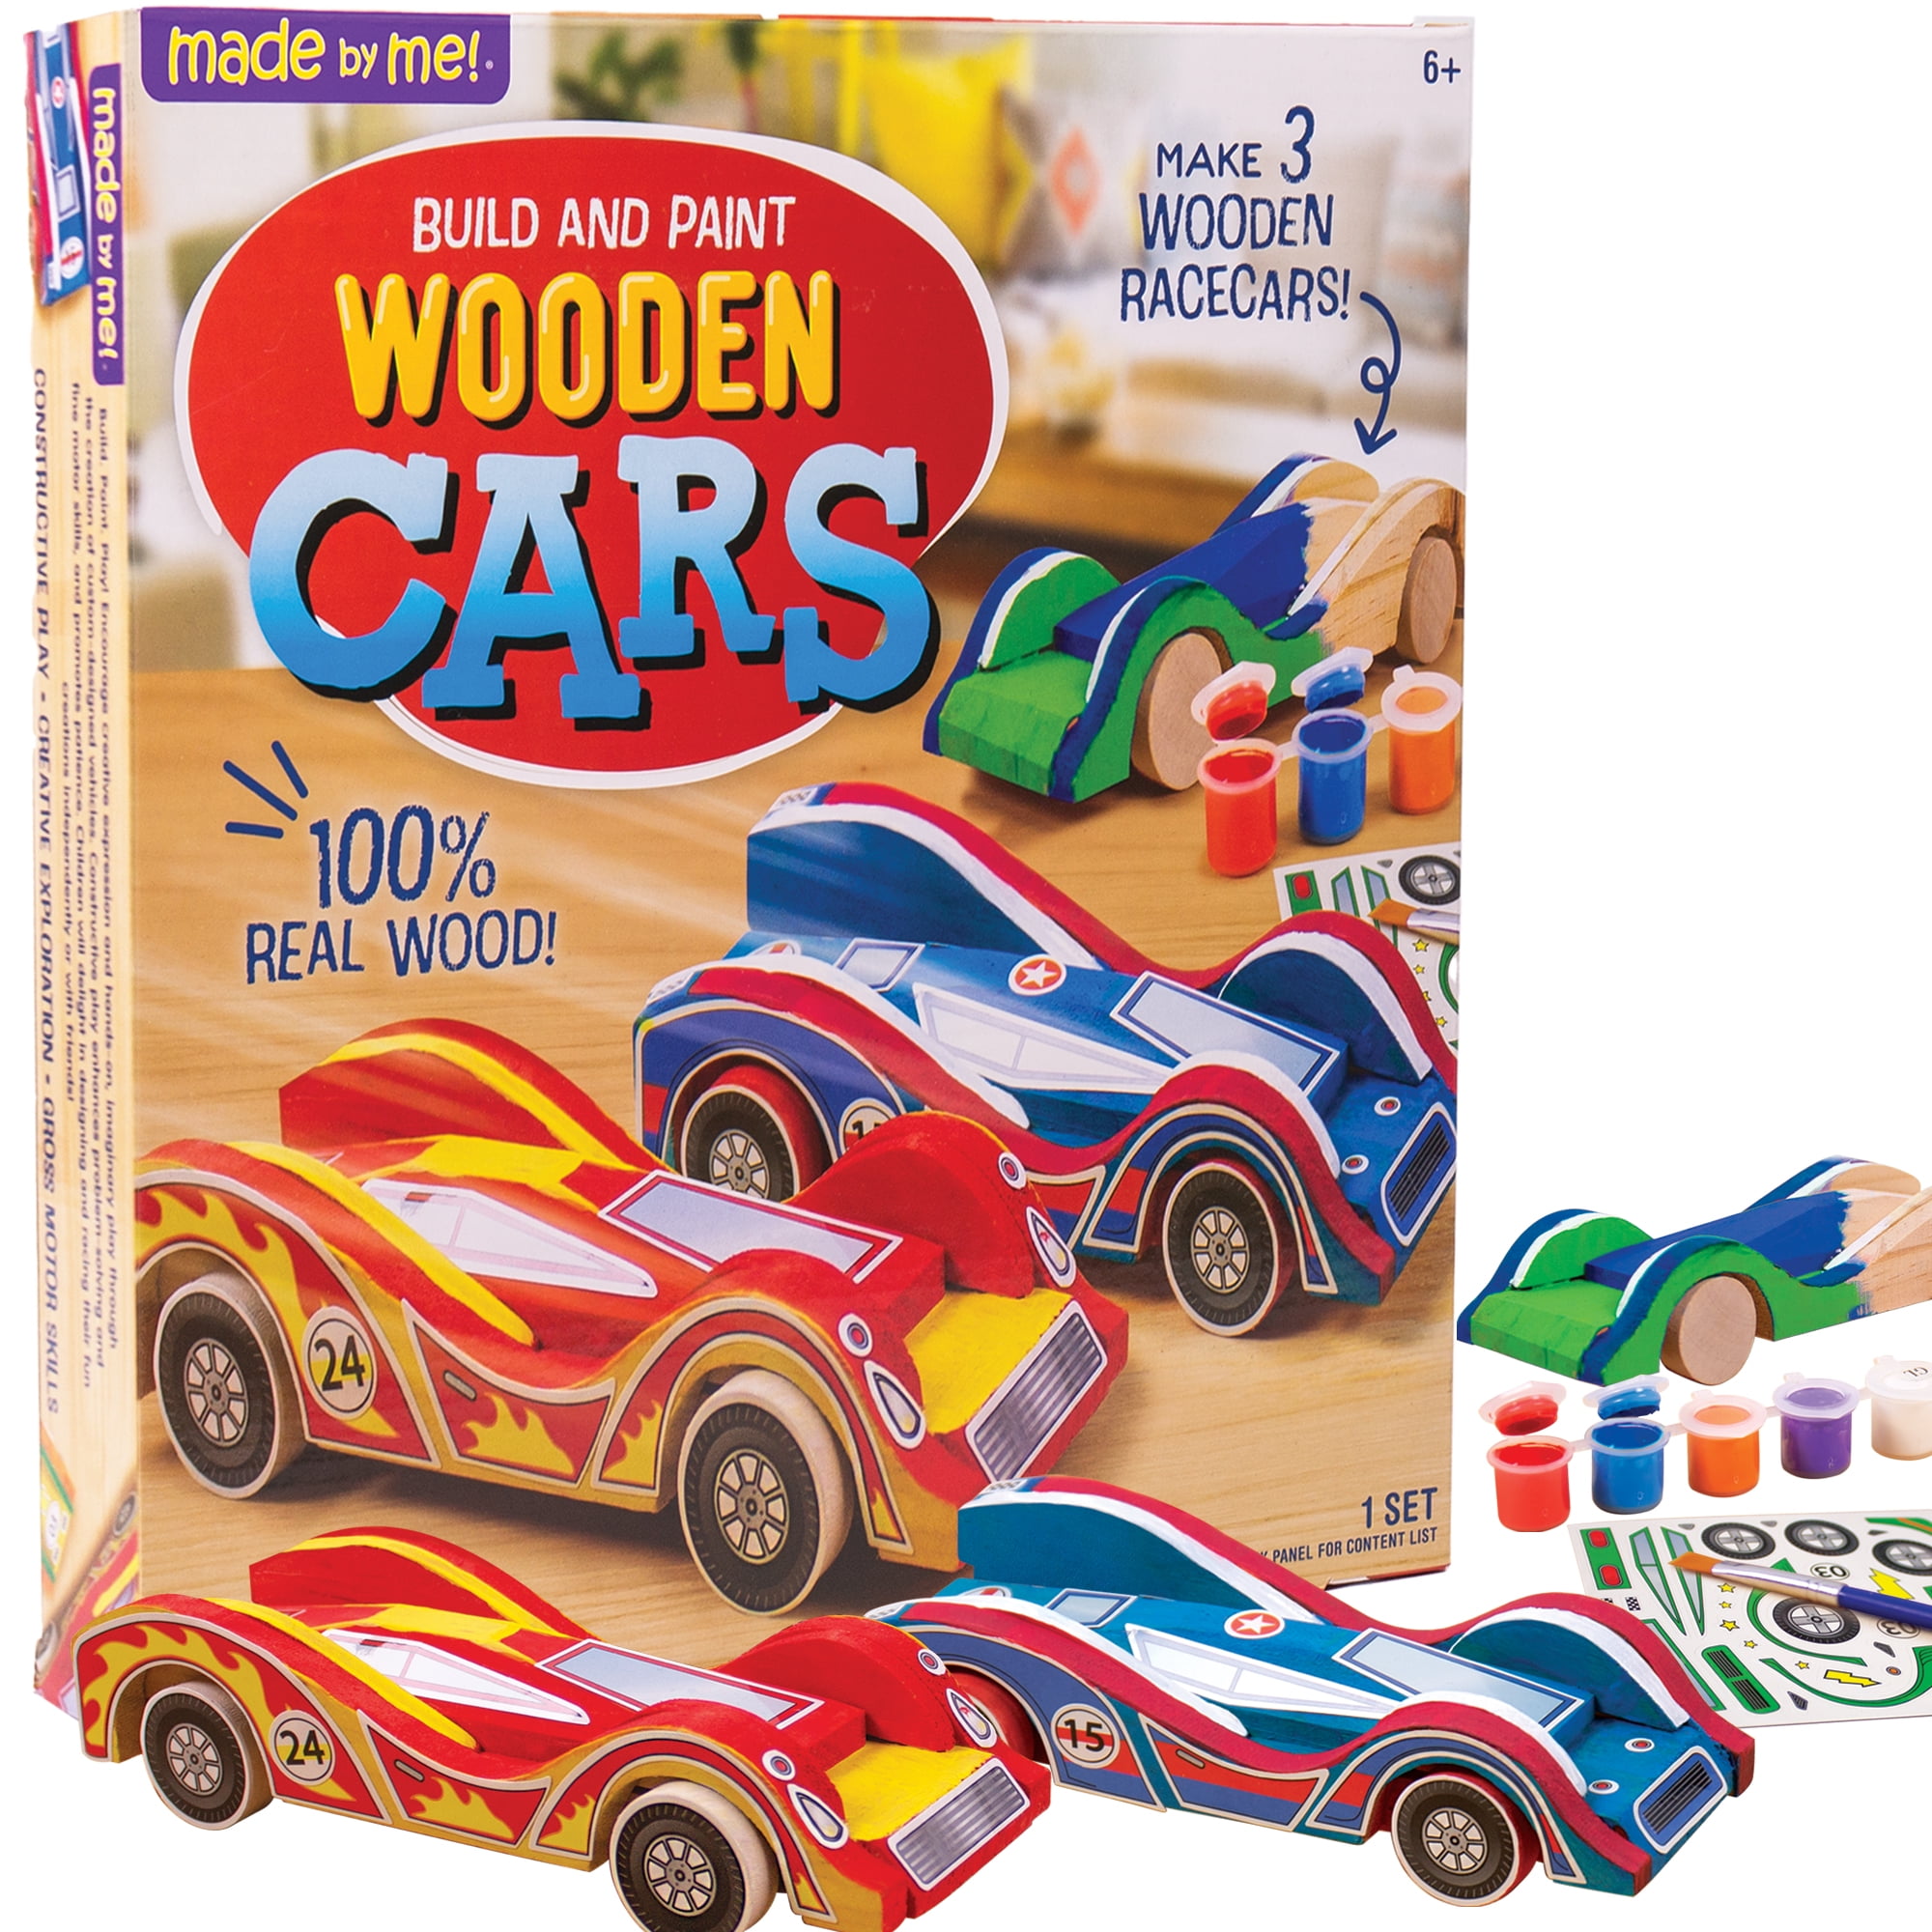 BY THV Kids Fun Pack! 4 Mini Race Cars Plus 4 Pack Self-Inking Stampers